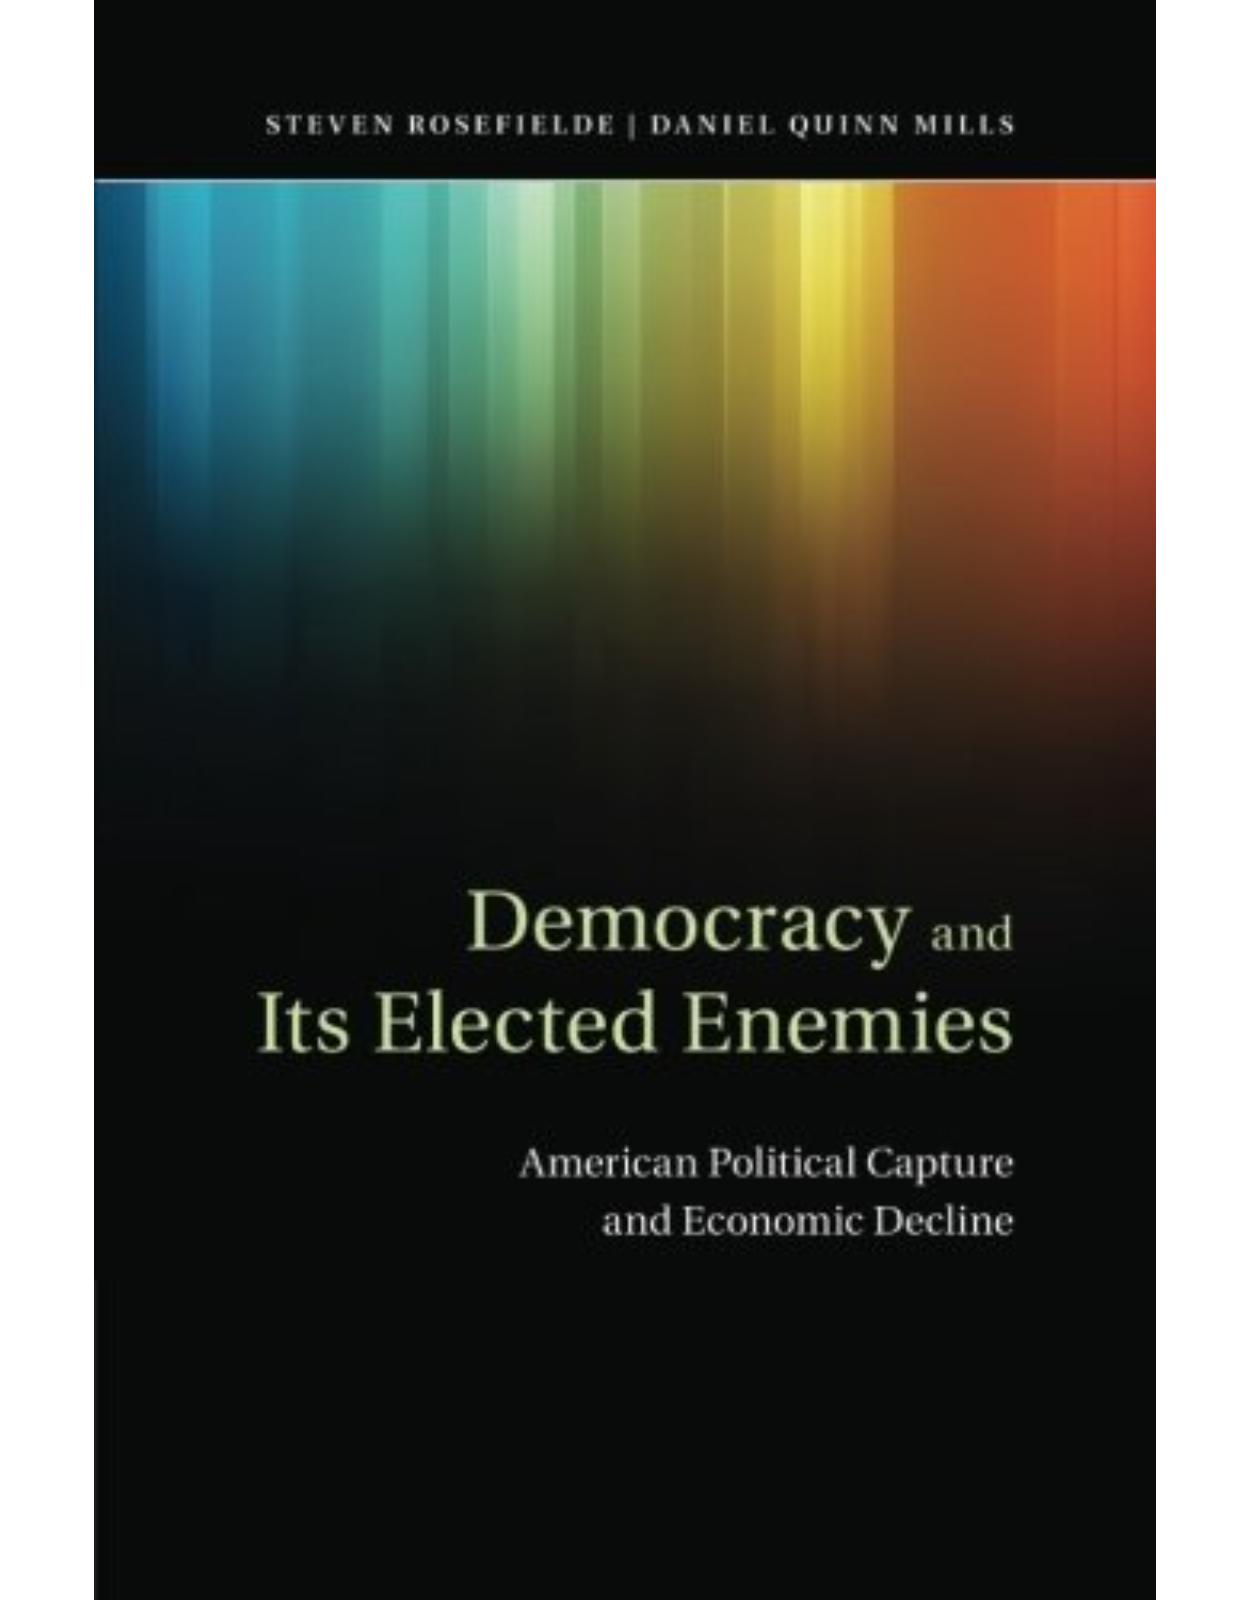 Democracy and its Elected Enemies: American Political Capture and Economic Decline 